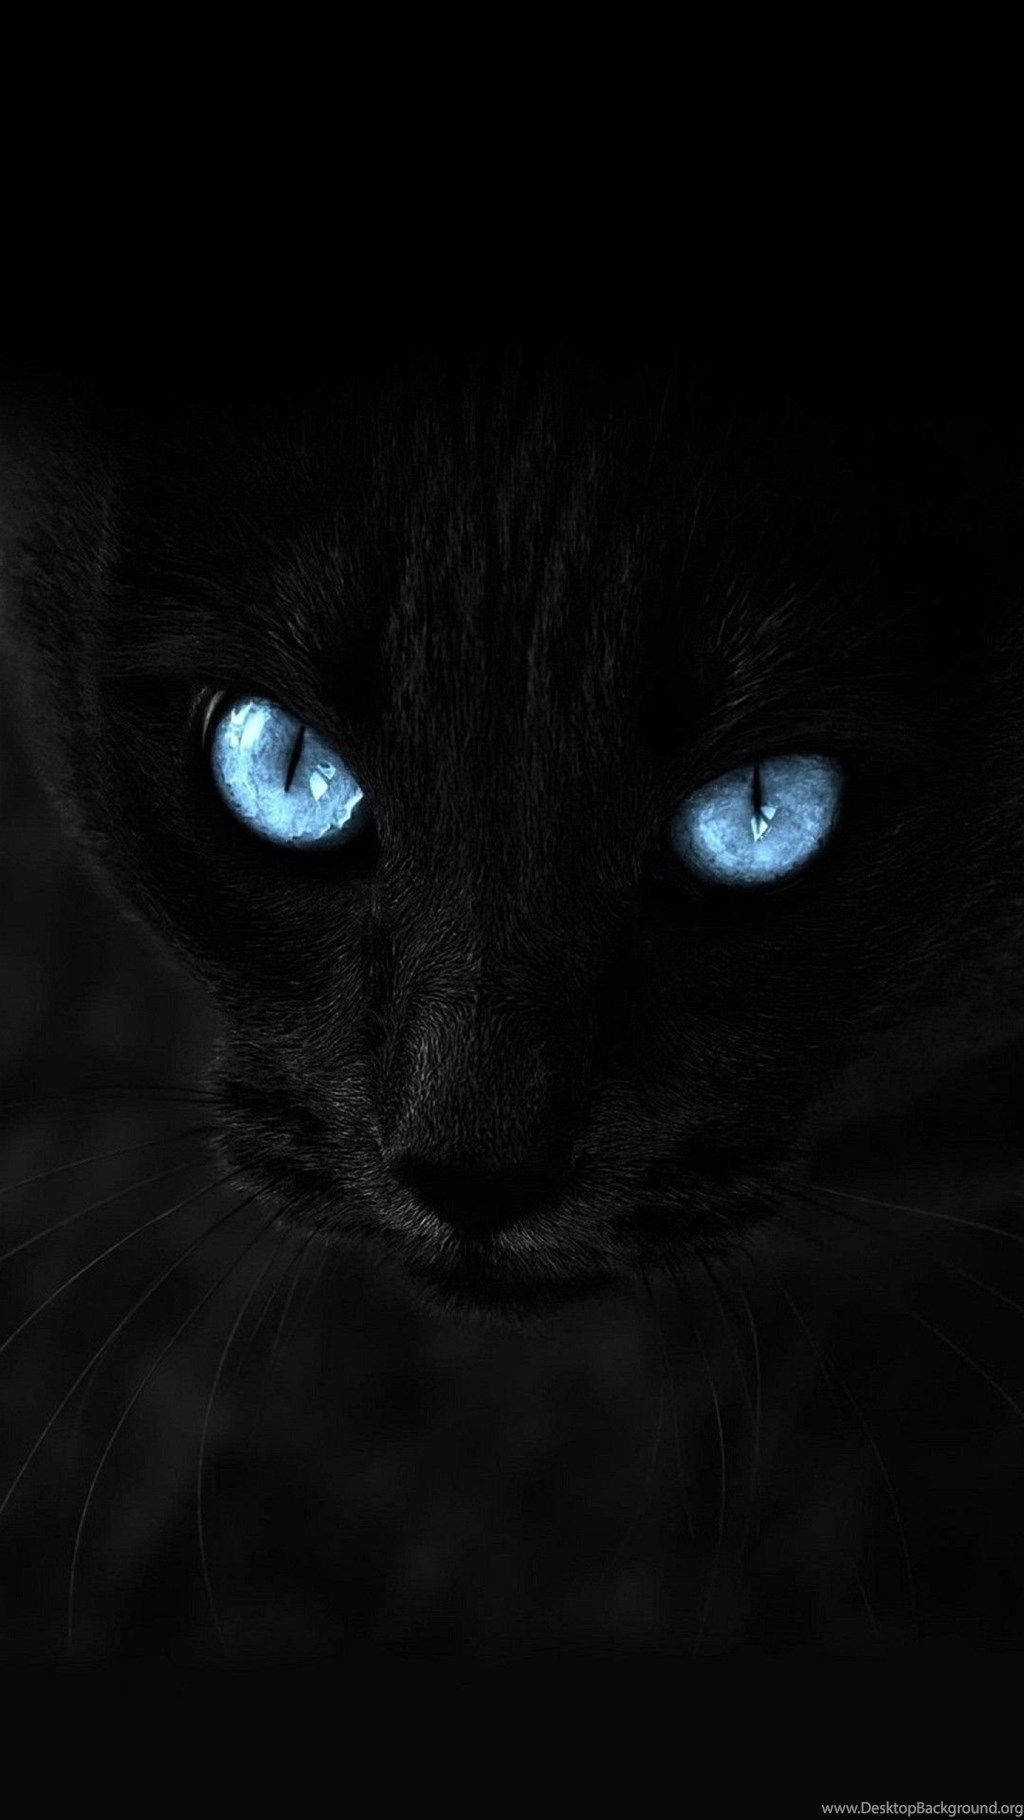 A Majestic Dark Cat With Blue Eyes For Your iPhone